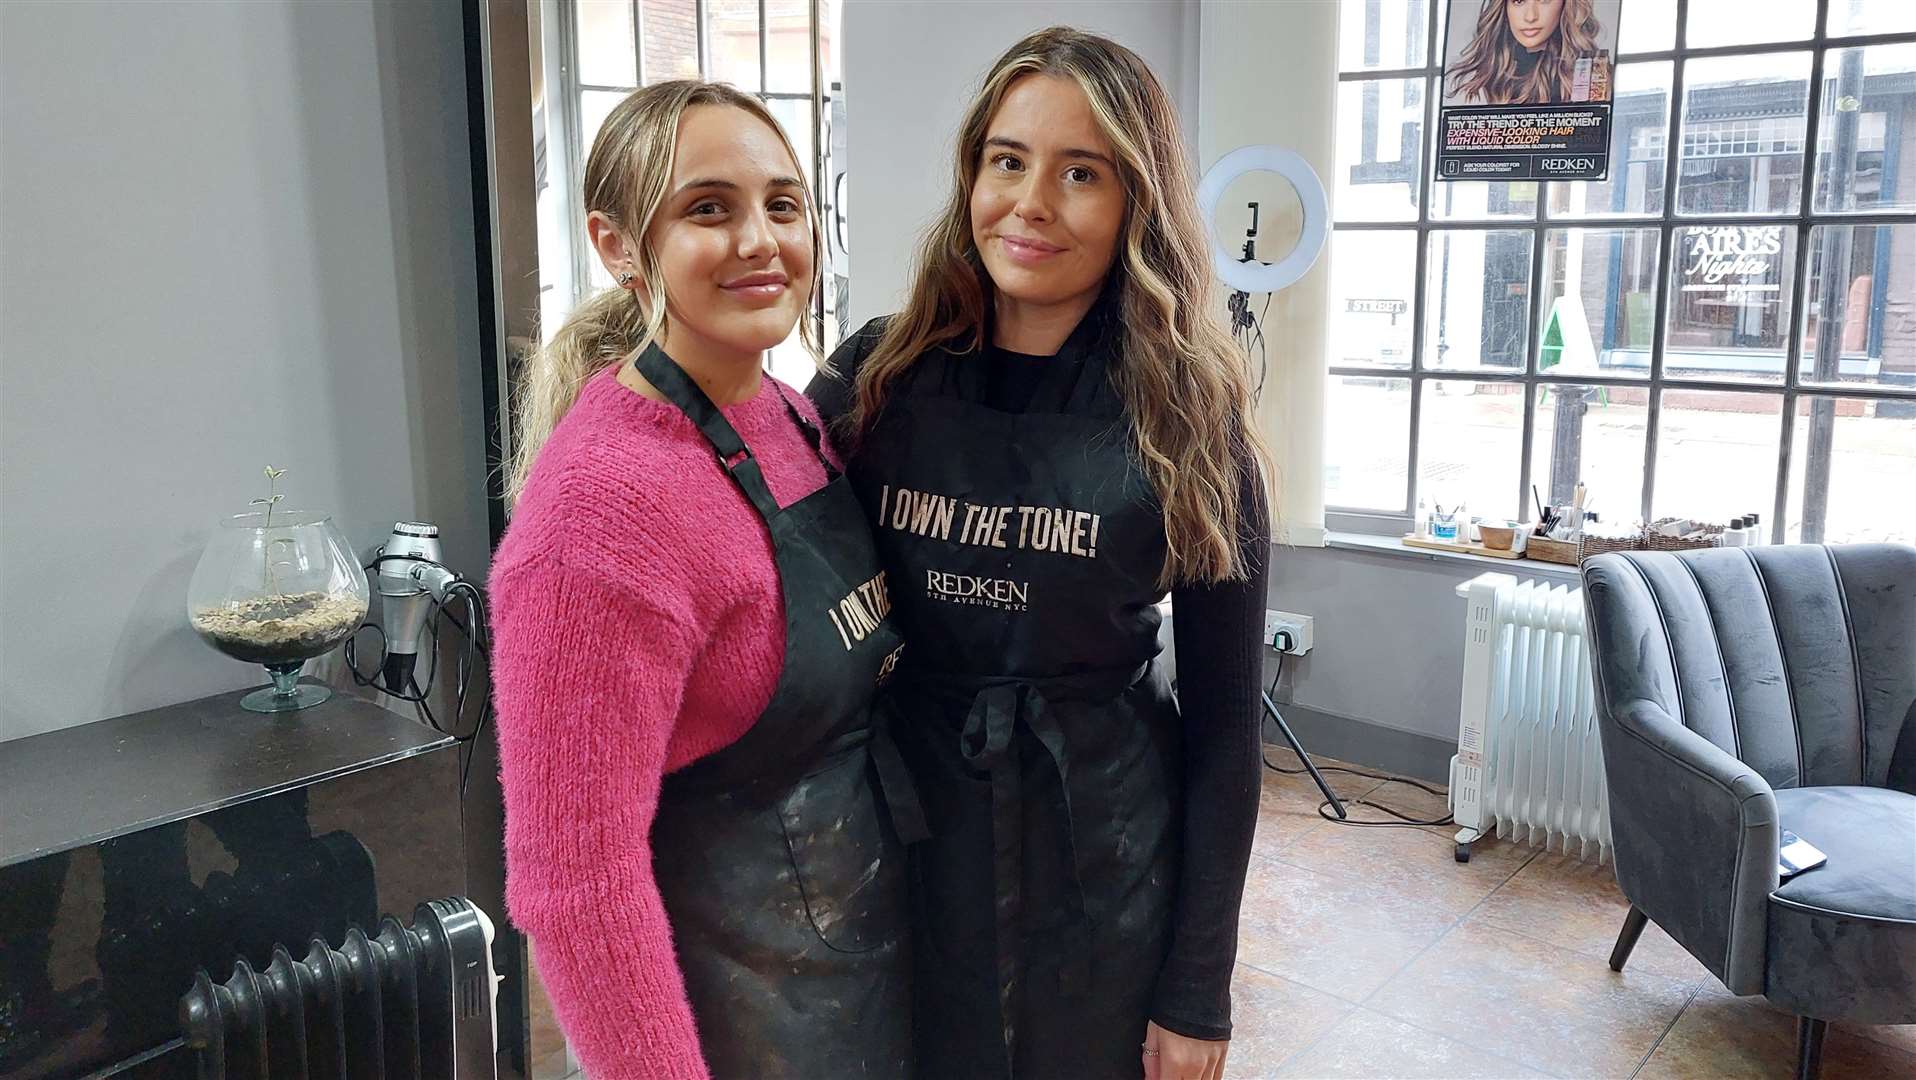 Graduate stylist Abigail Gibbs with Chelsea Ford, owner of Nat'ural Hair Design